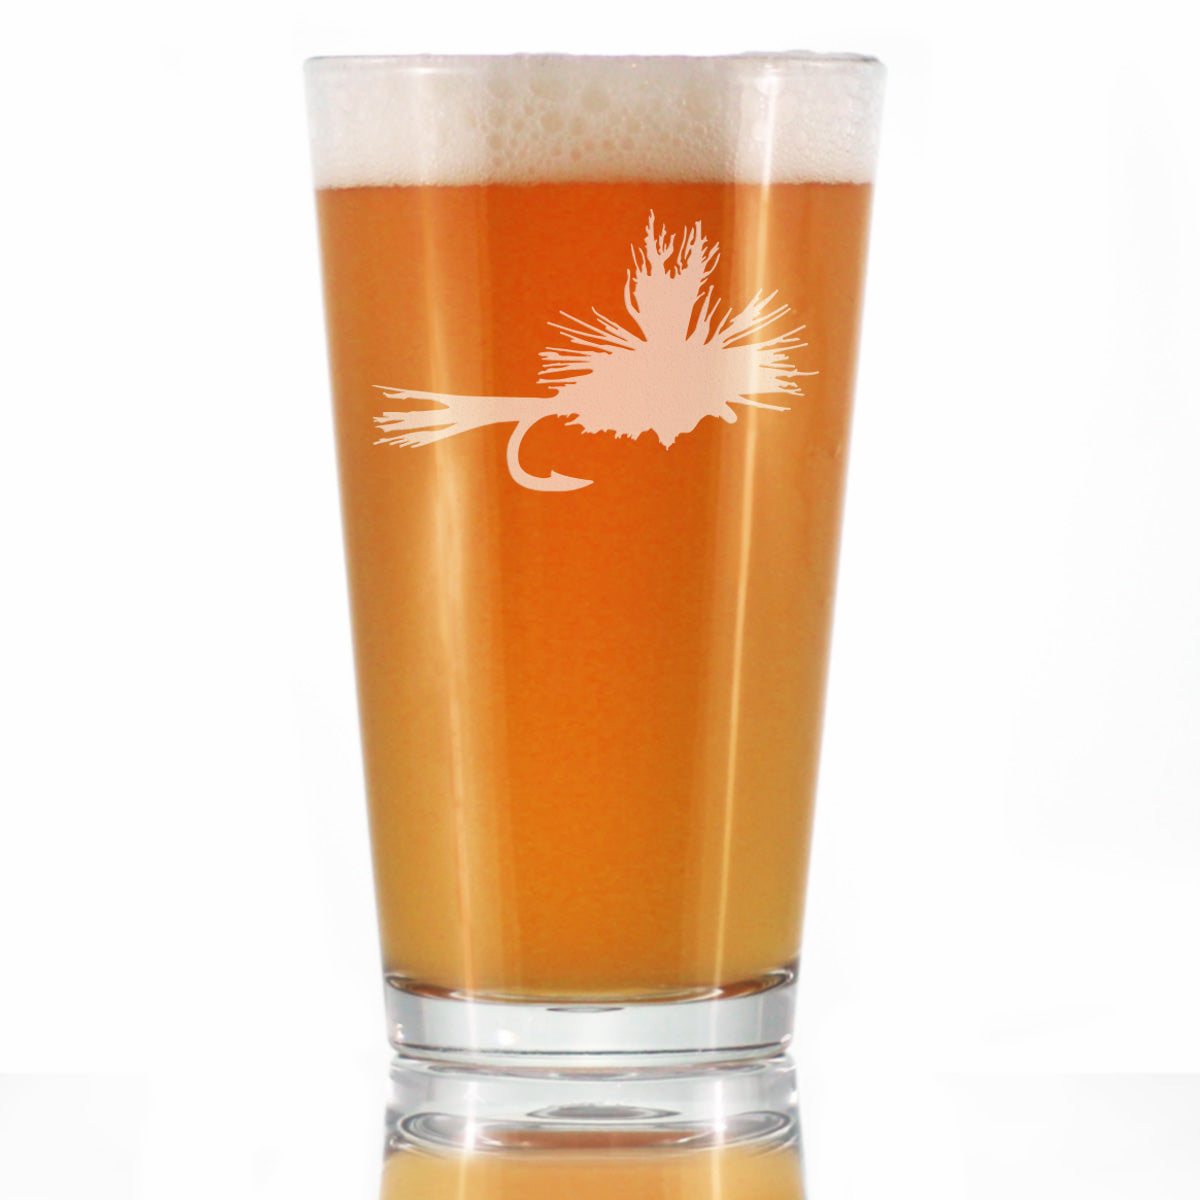 Fly Fishing Pint Glass for Beer - Unique Flyfishing Themed Gifts for Fishermen - 16 oz Glasses